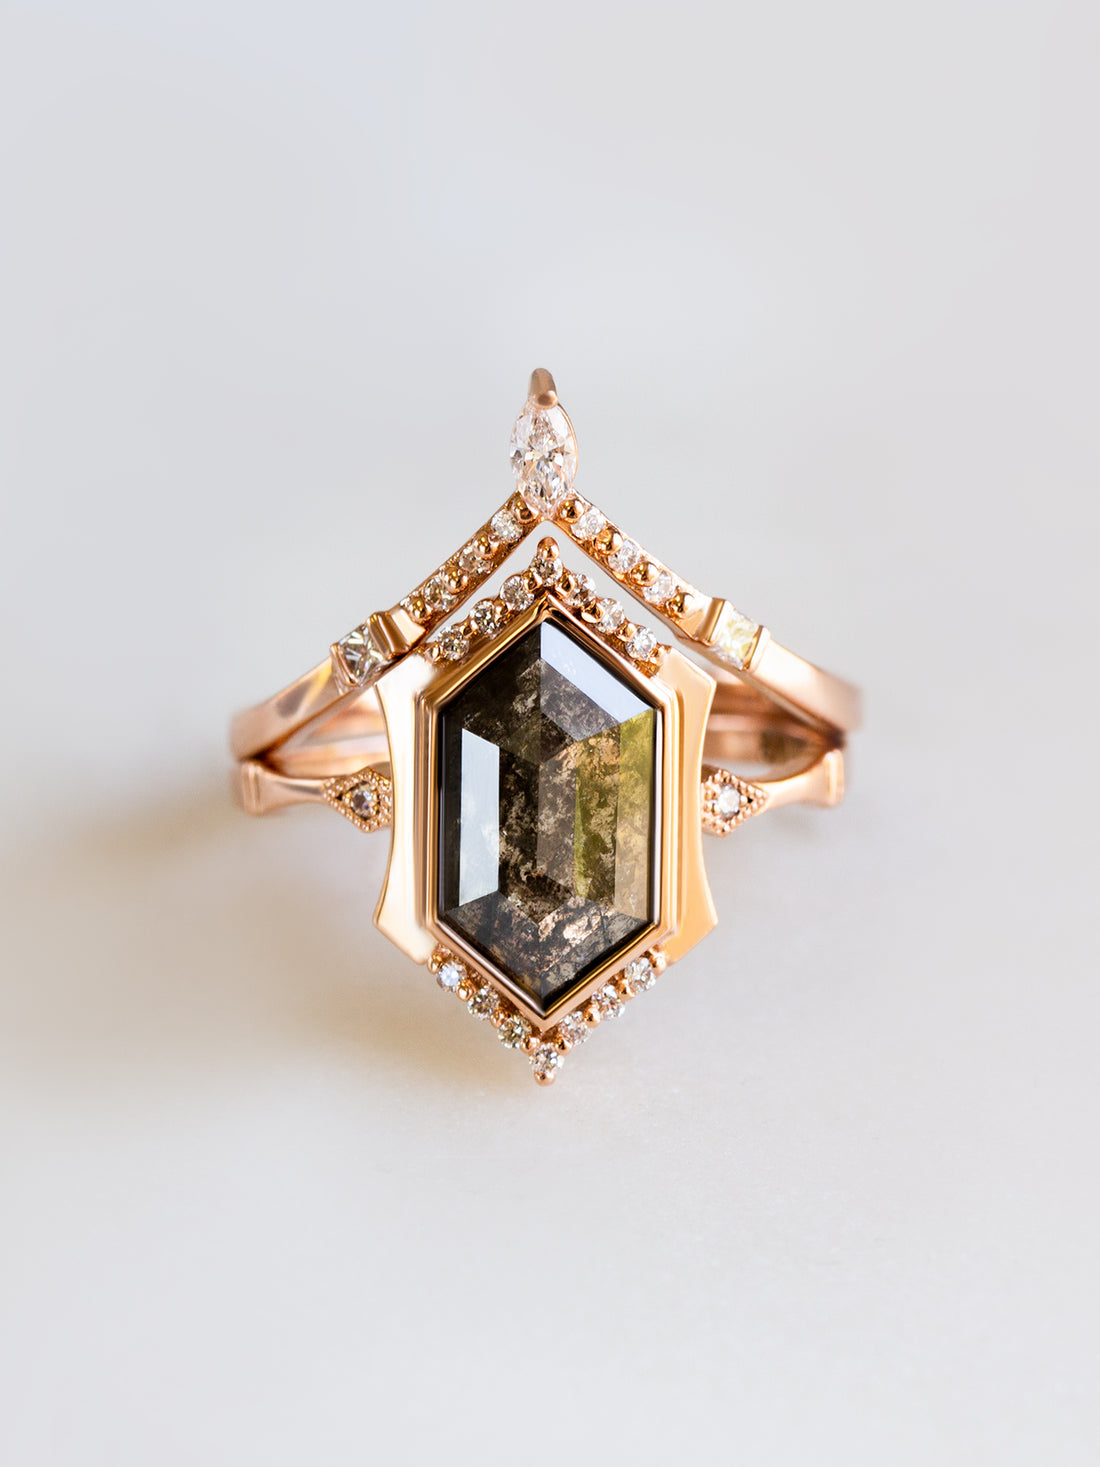 hiddenspace-engagementring-saltandpepperdiamond-joselyn-ring-unique-artdeco-finejewelry-proposal-ring-7